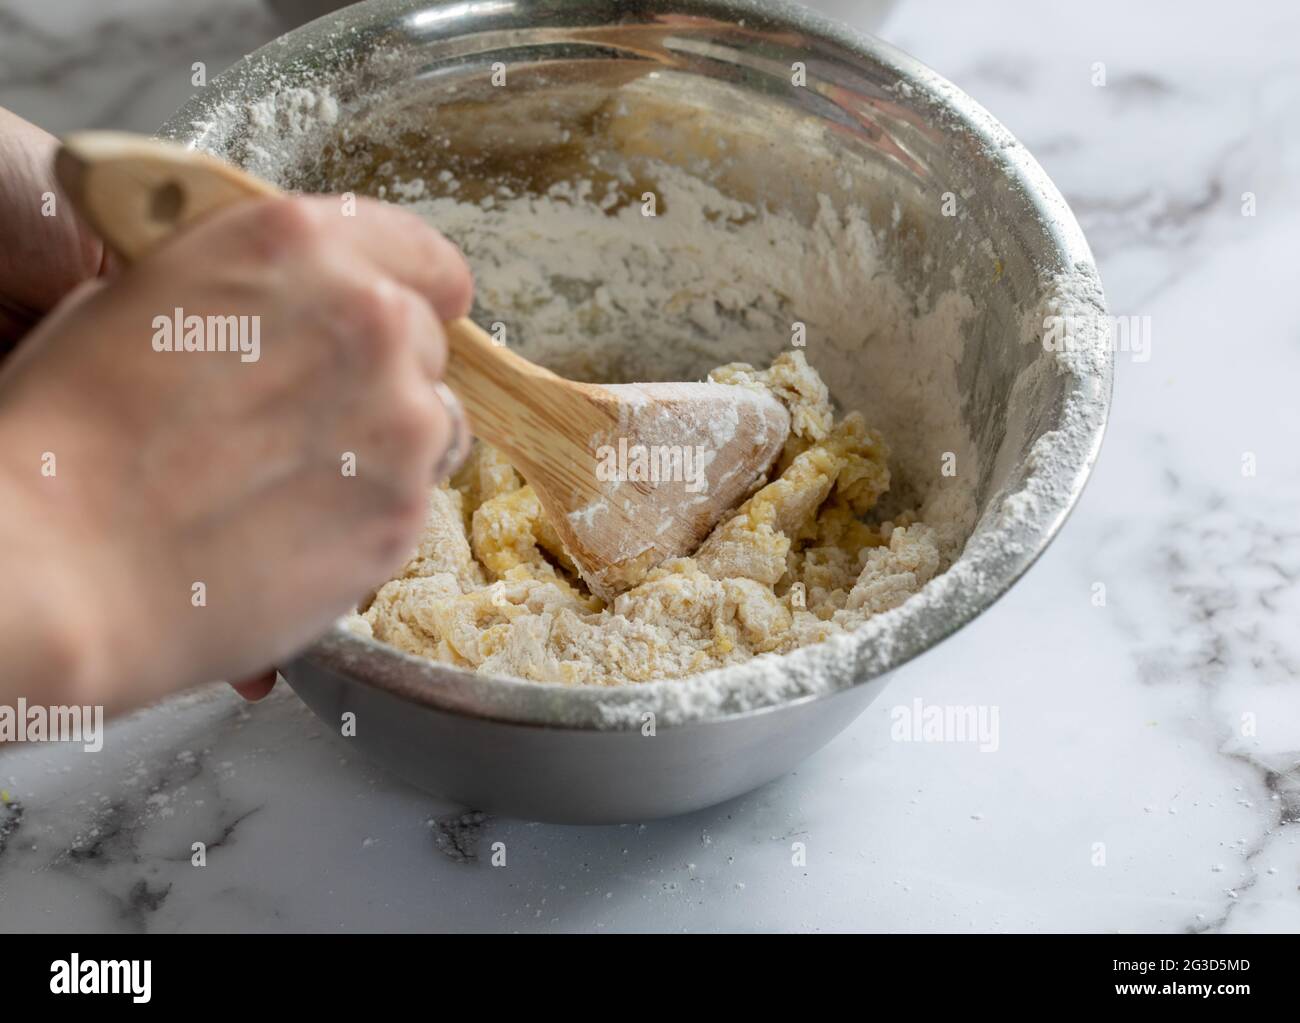 woman hand holding a wooden spoon mixing ingredients in a metal round bowl on a white marble surface Stock Photo